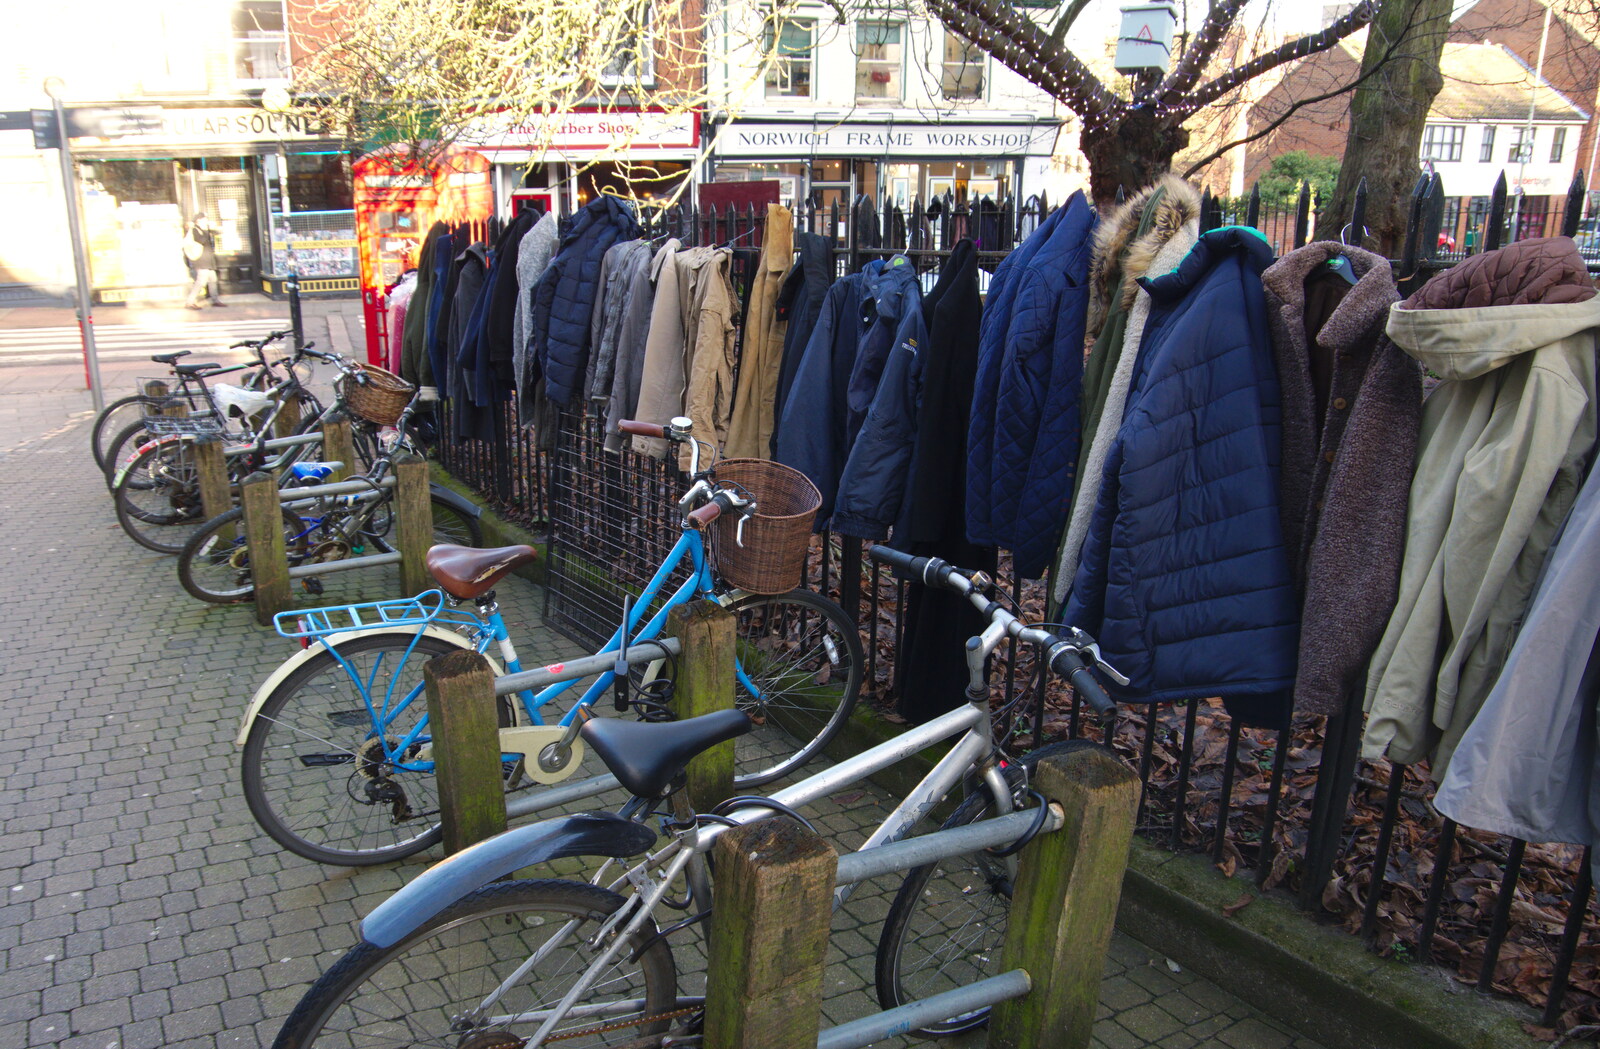 Bikes, and coats for the homeless from A Spot of Christmas Shopping, Norwich, Norfolk - 23rd December 2019